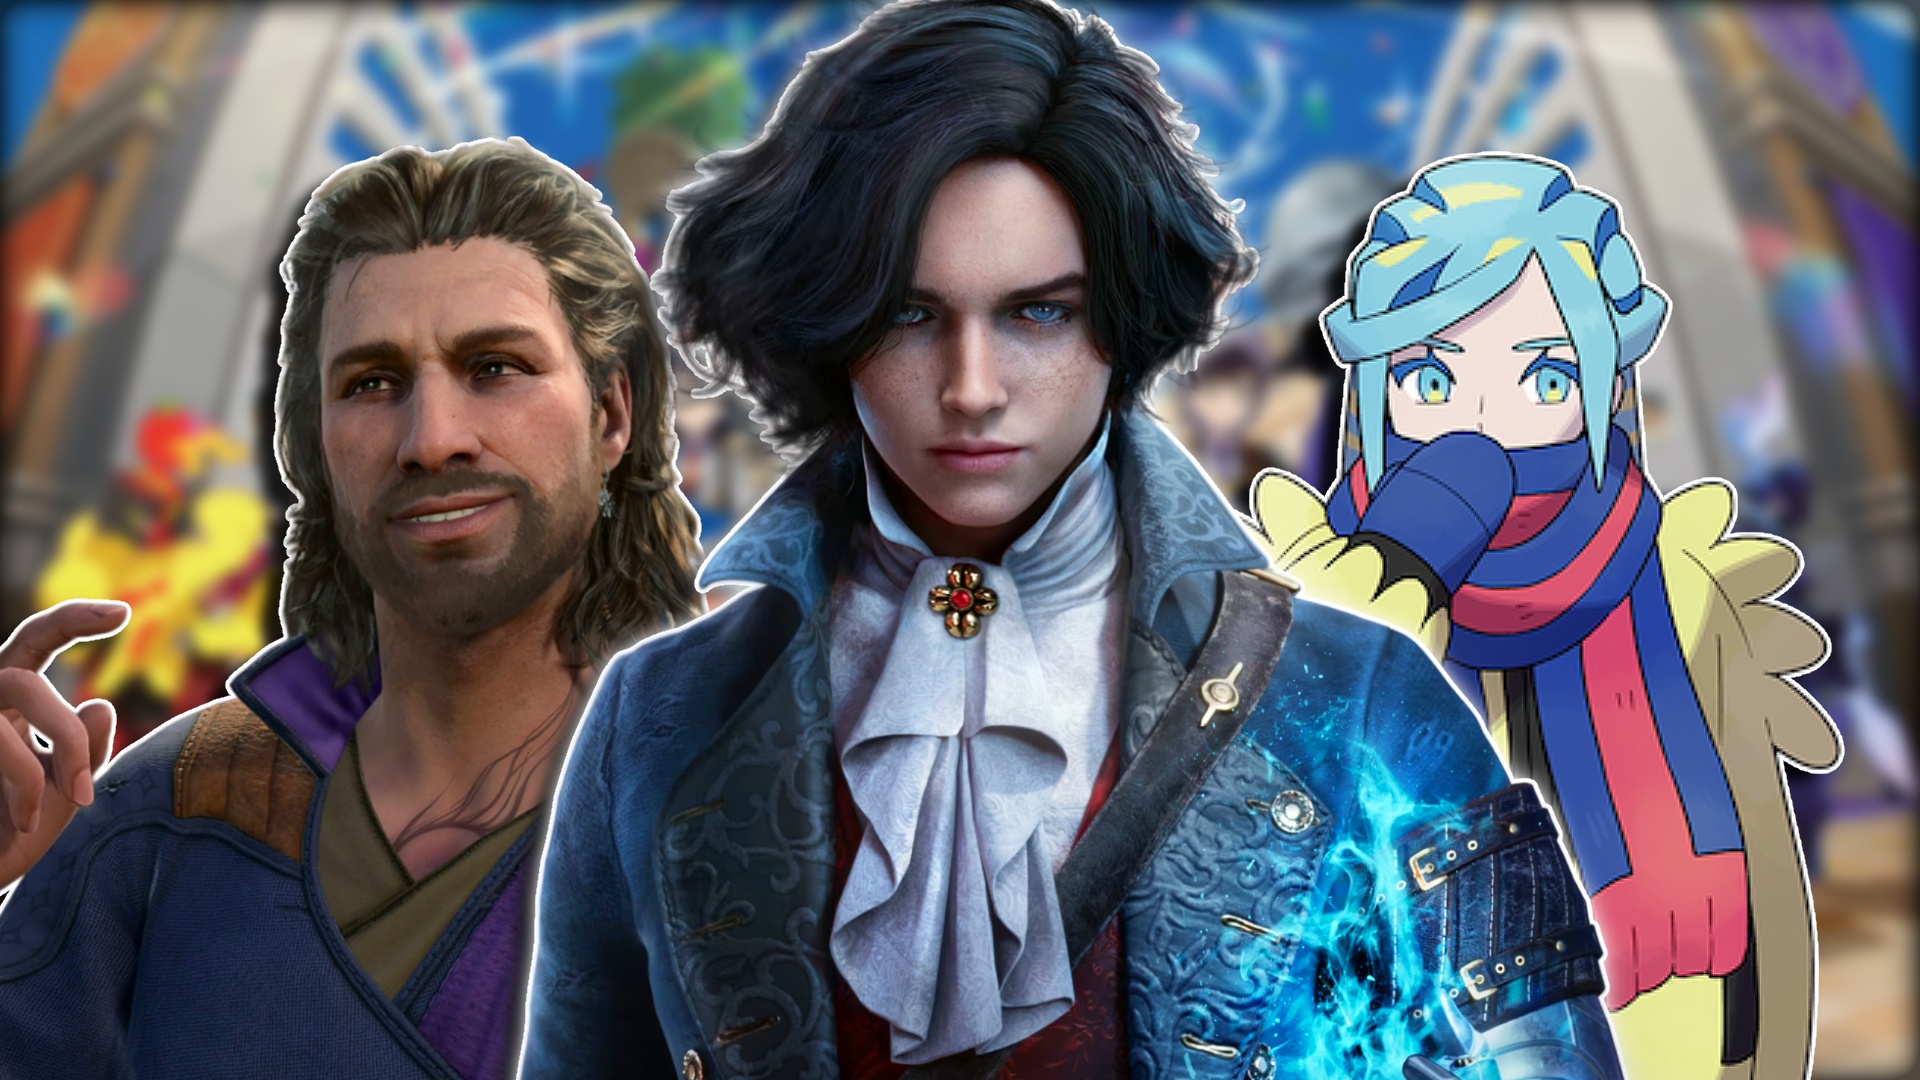 5 most visually stunning RPGs to look out for in 2023